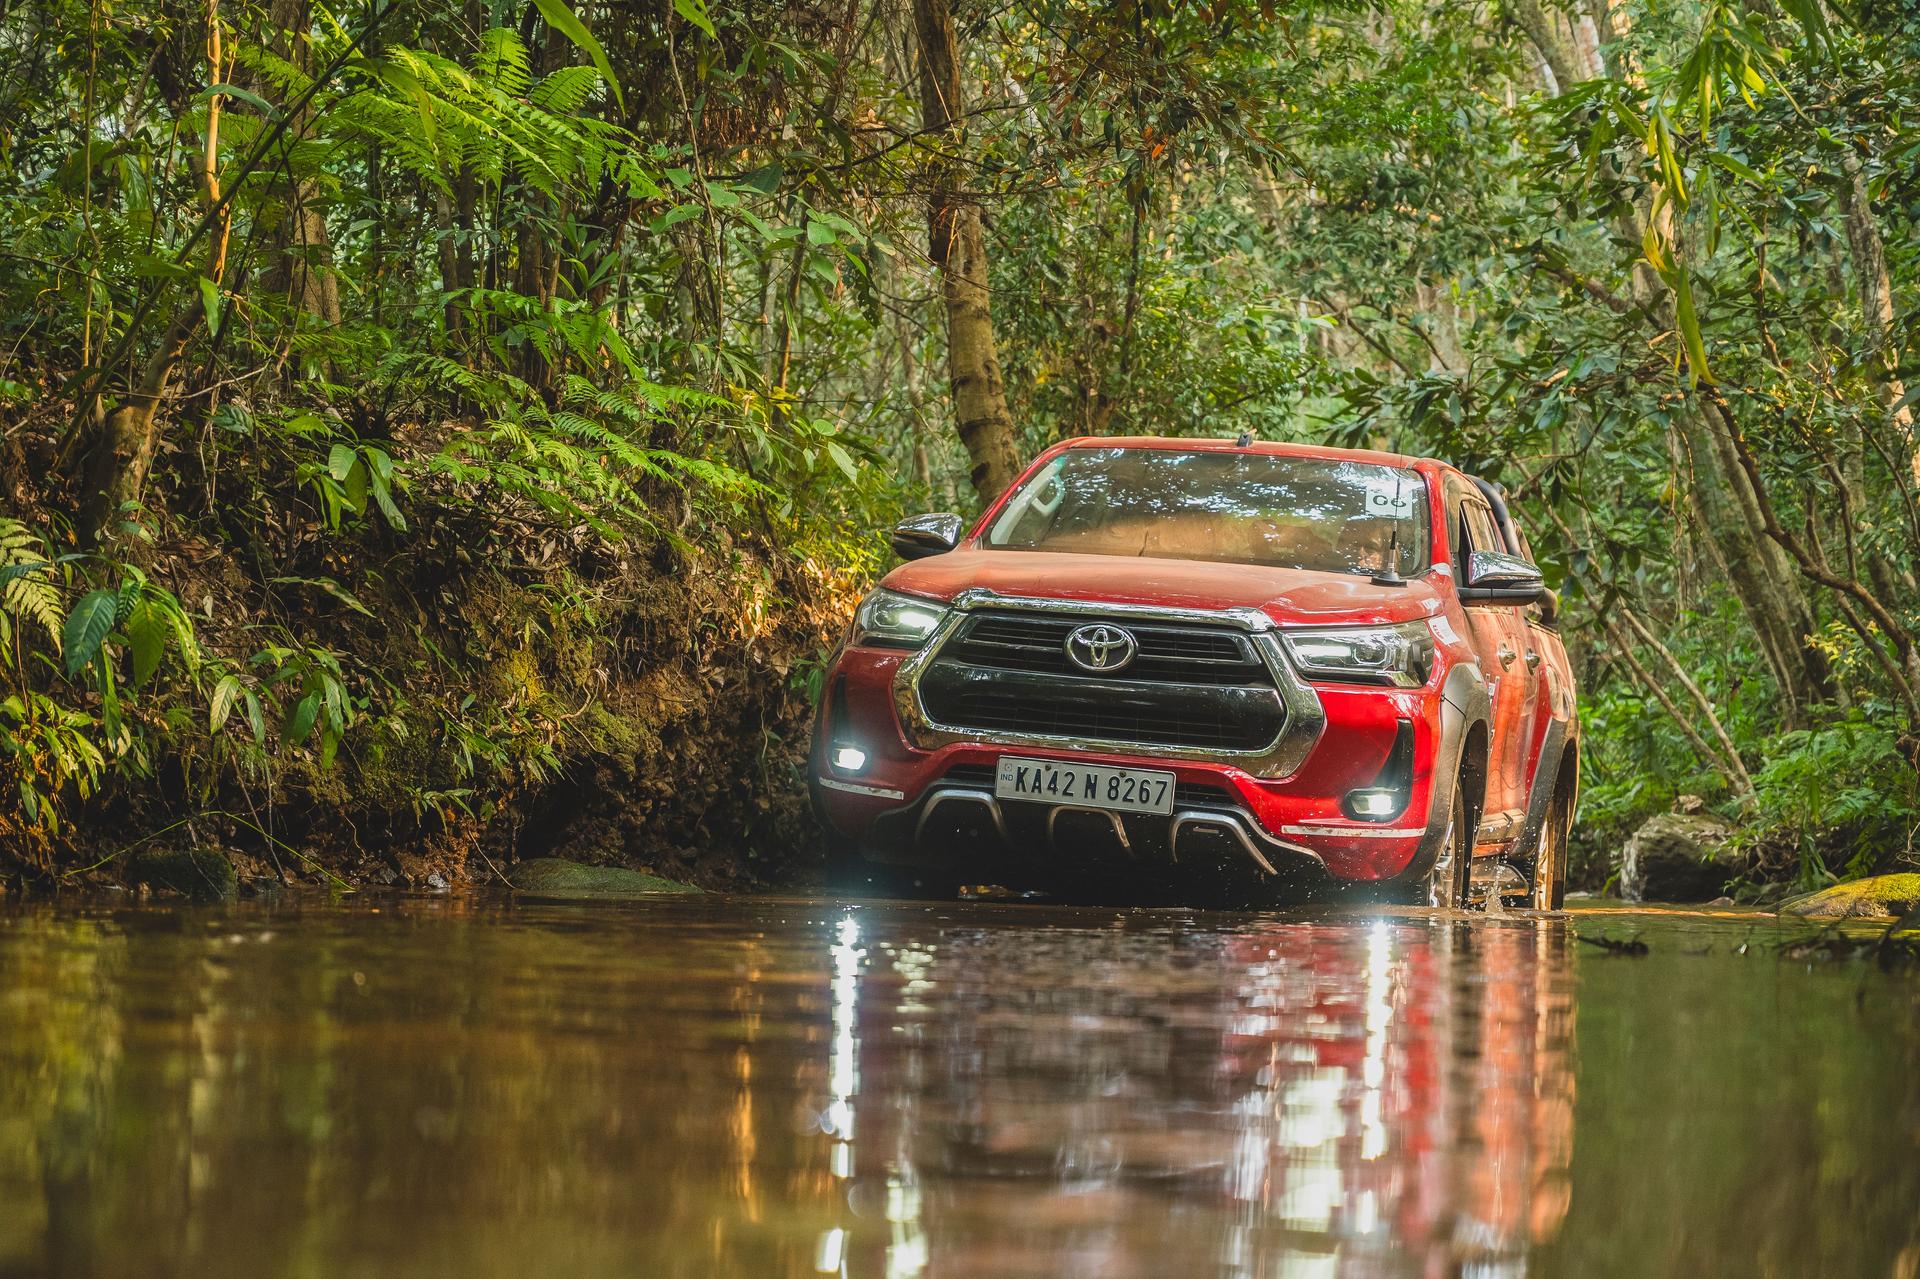 This edition of Toyota Great 4x4 Expedition saw participants drive across two states – Assam & Meghalaya - over two days. 